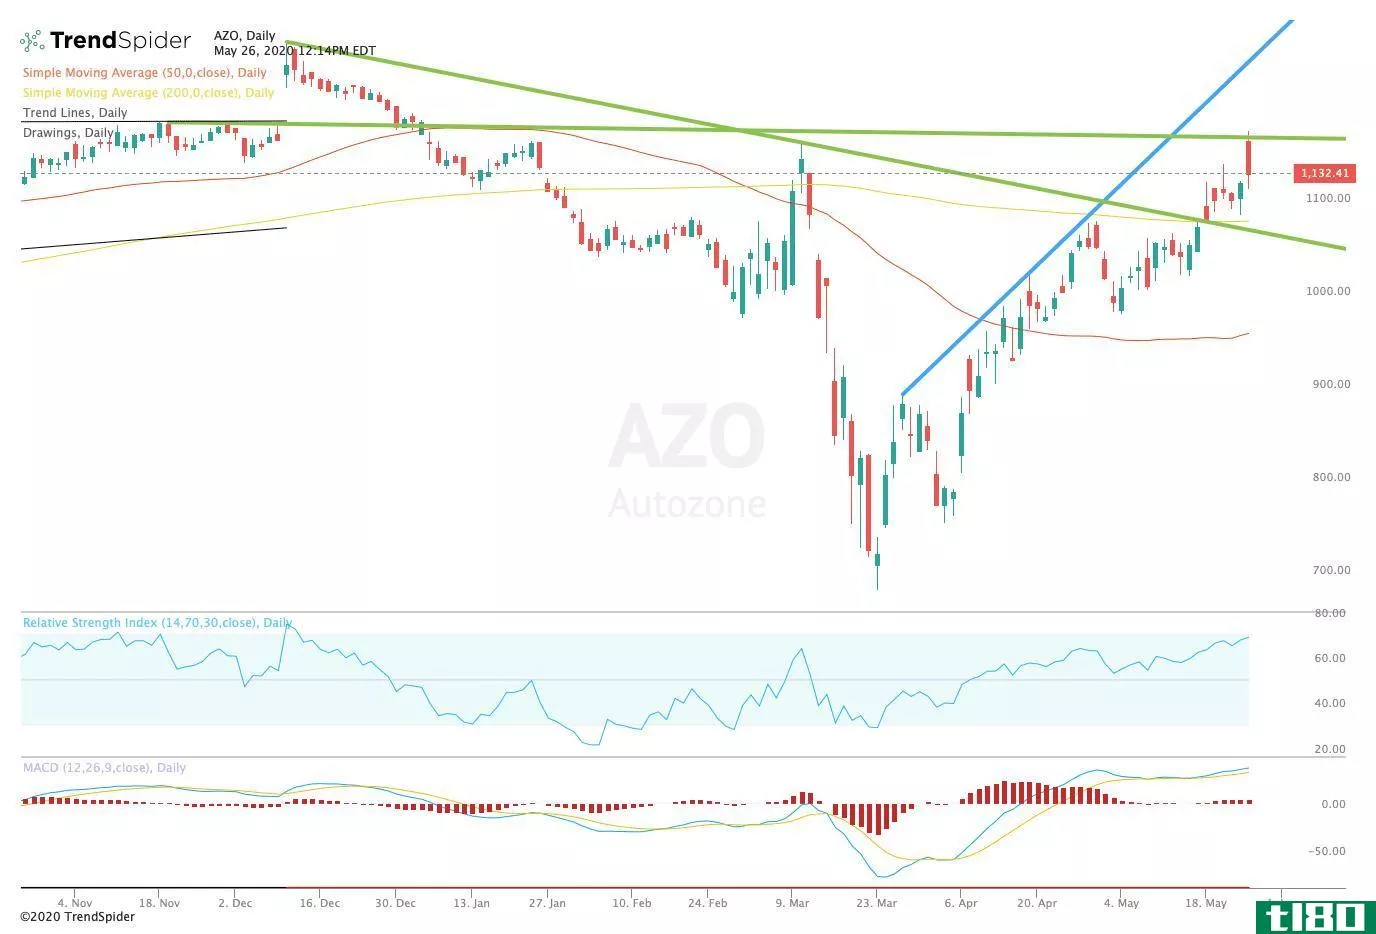 Chart showing the share price performance of AutoZone, Inc. (AZO)